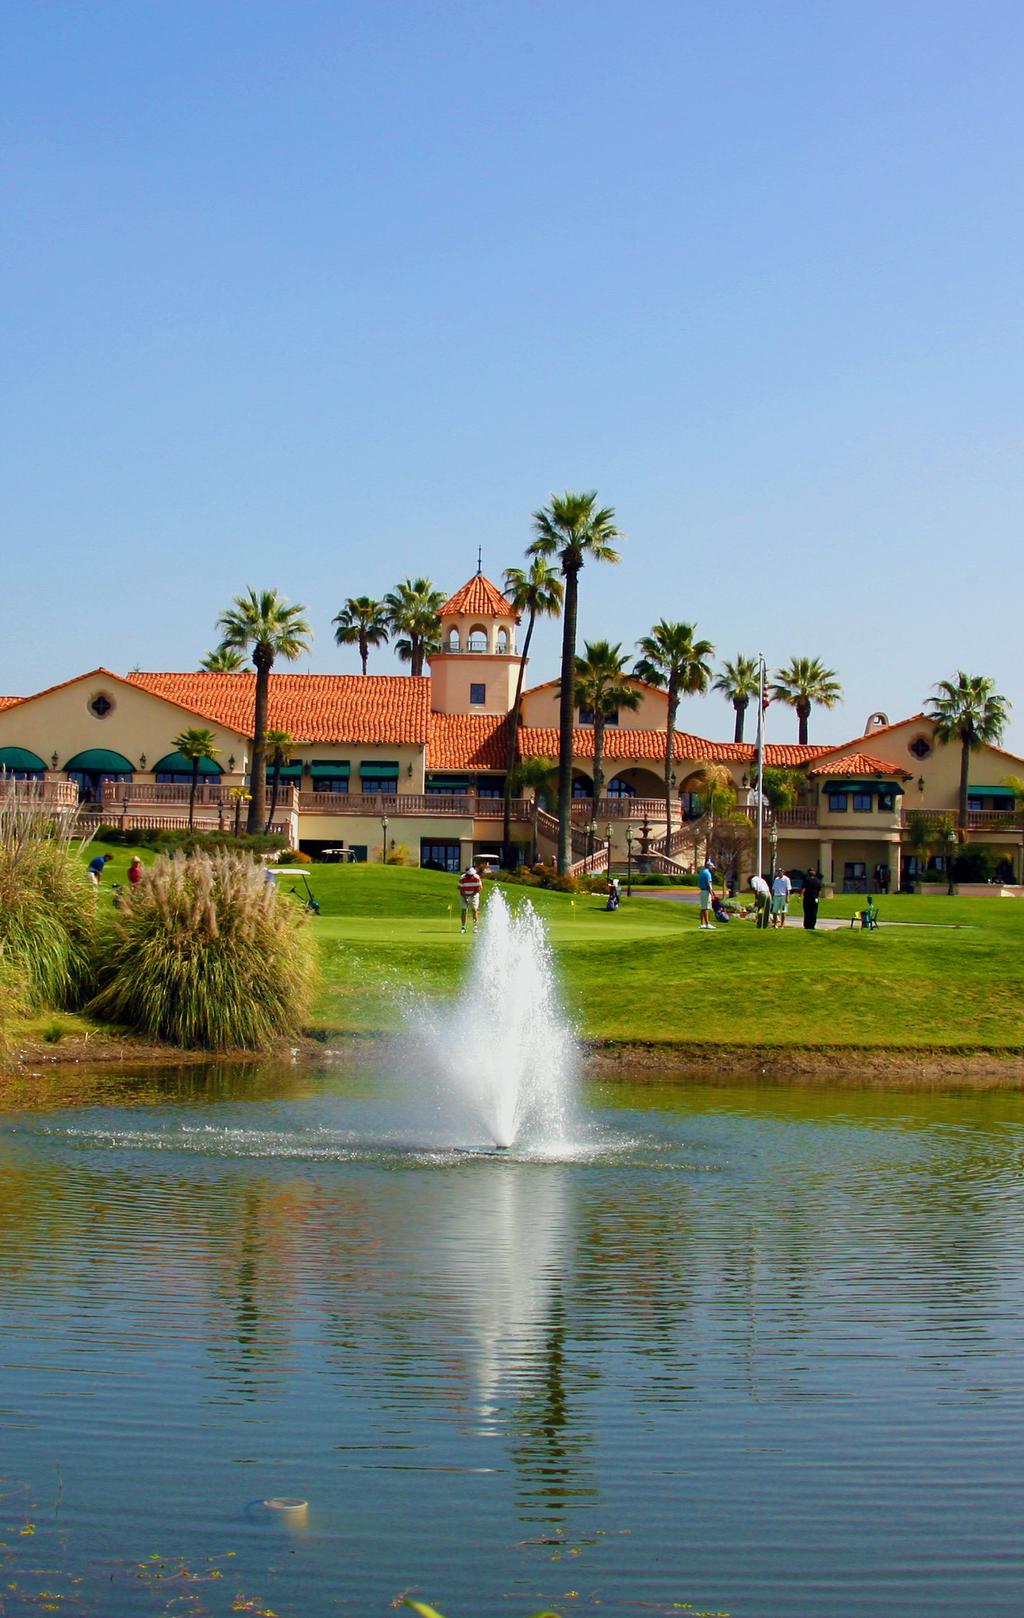 District 6 Golf Club February Newsletter Page 3 Madera Golf Course Will Host our February Tourney Our second tournament of the 2018 season will be contested at the Madera Municipal golf course on